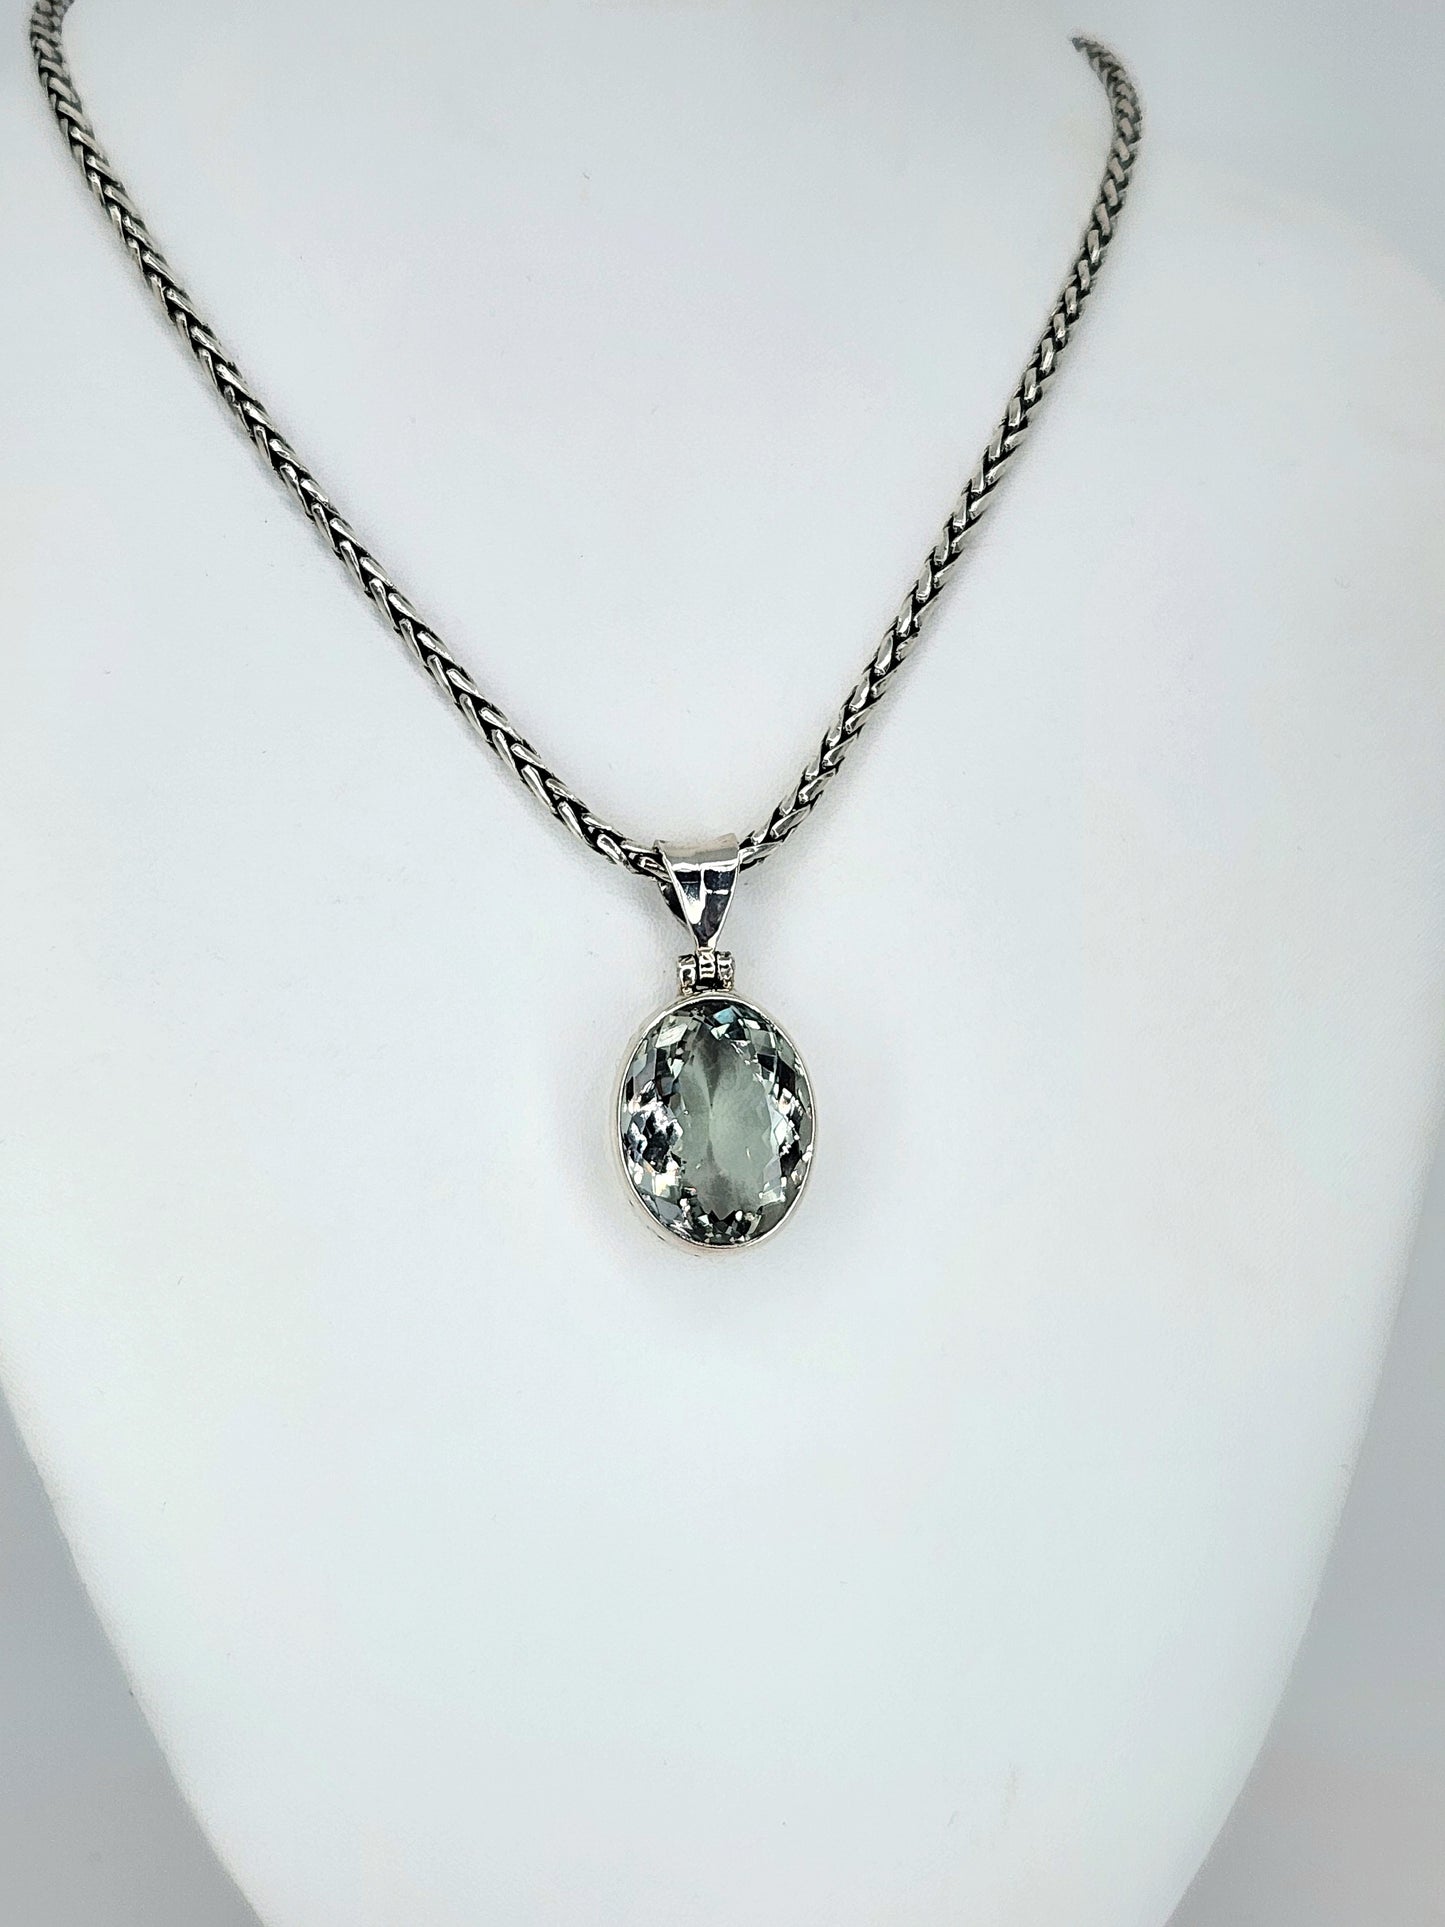 Janice Carson - Green Amethyst Oval Cut Pendant With Sterling Silver Necklace